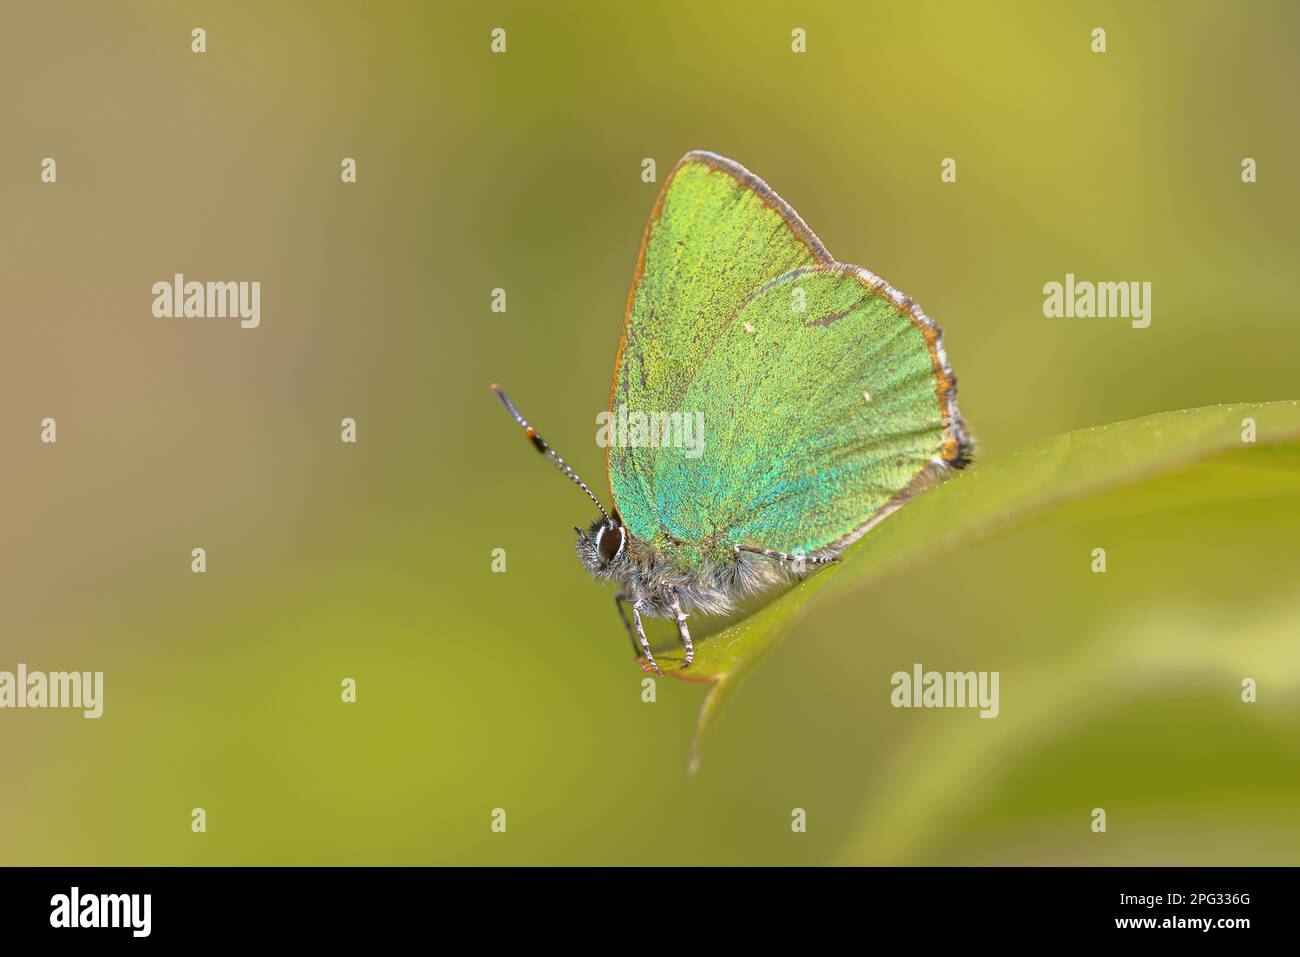 Green hairstreak (Callophrys rubi) butterfly resting on green leaf with green background. Wildlife scene of nature in Europe. Stock Photo